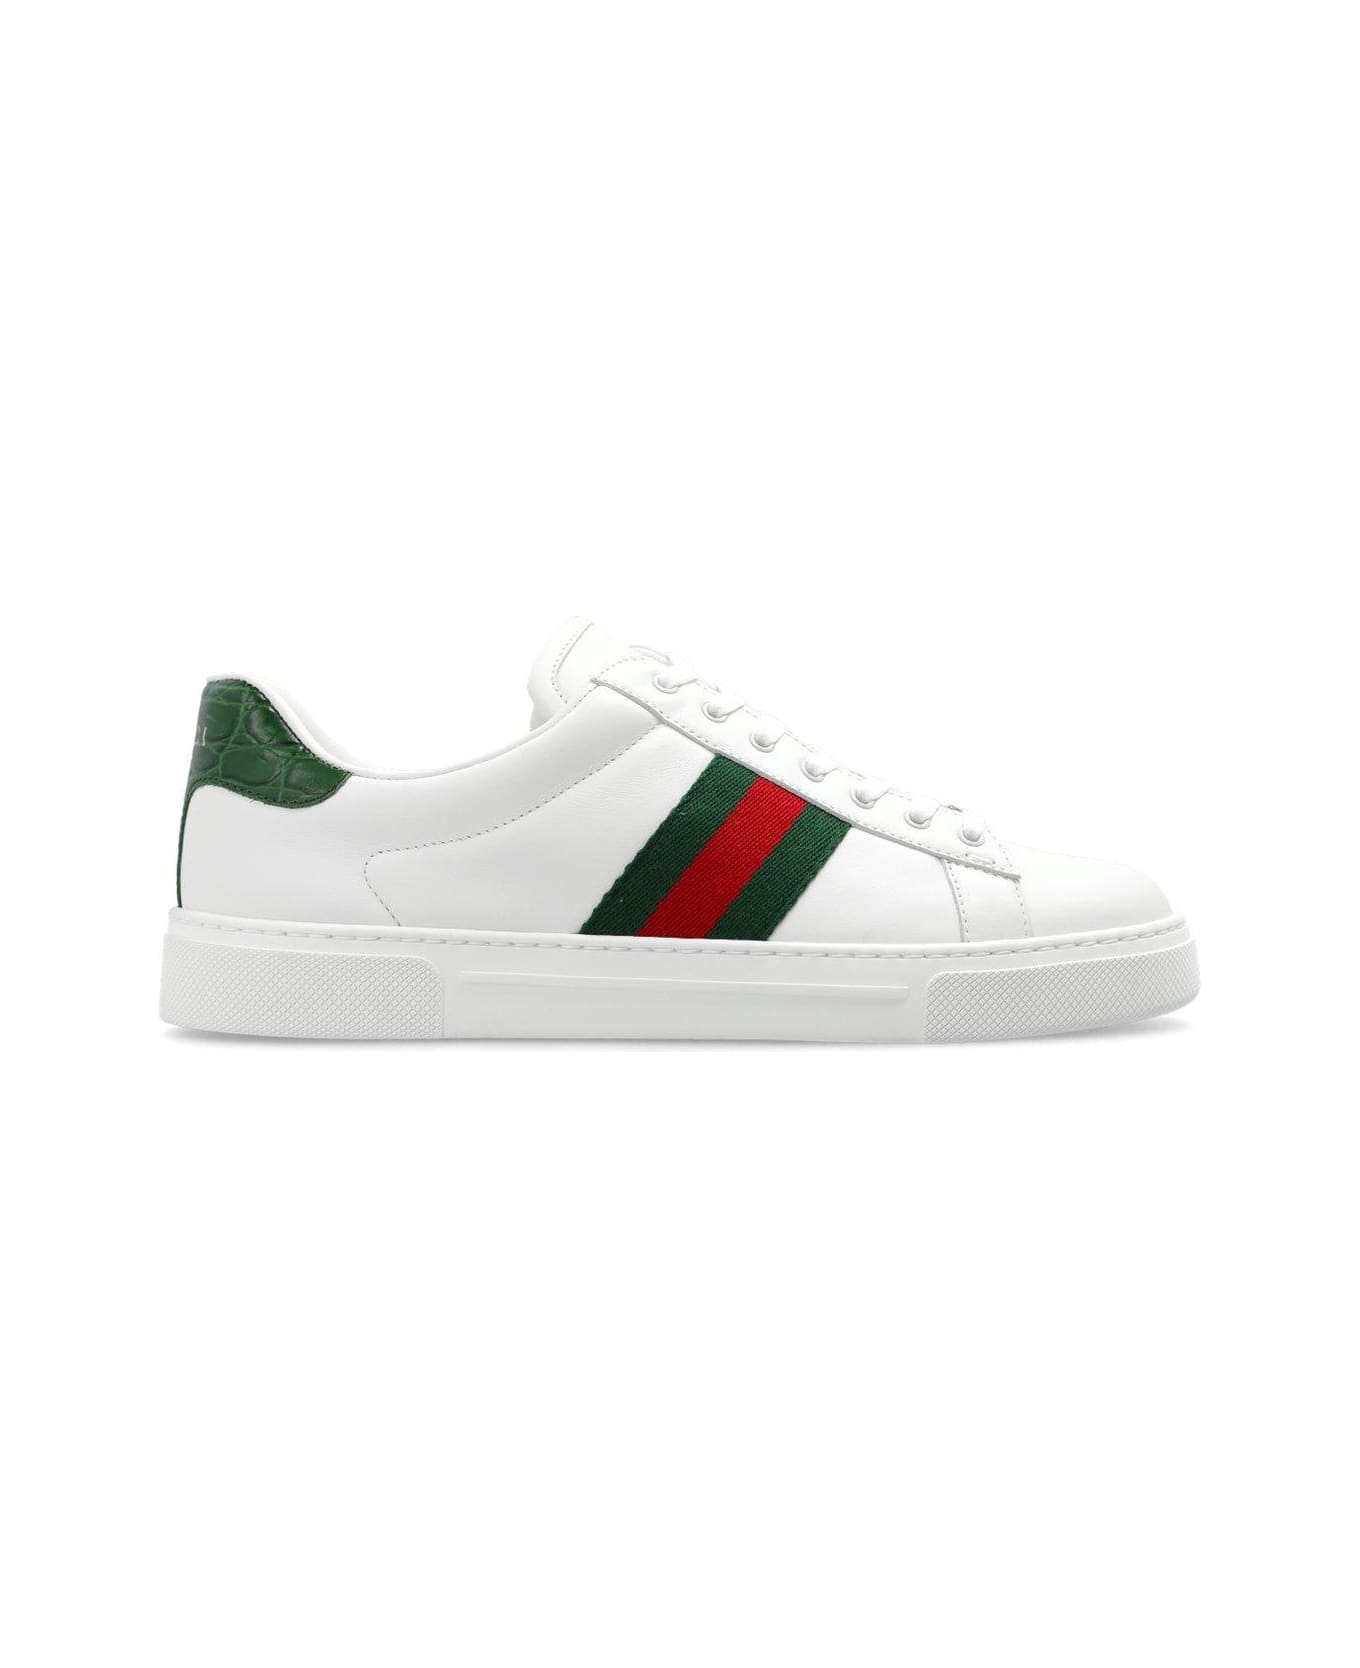 Gucci Ace Low-top Sneakers - White